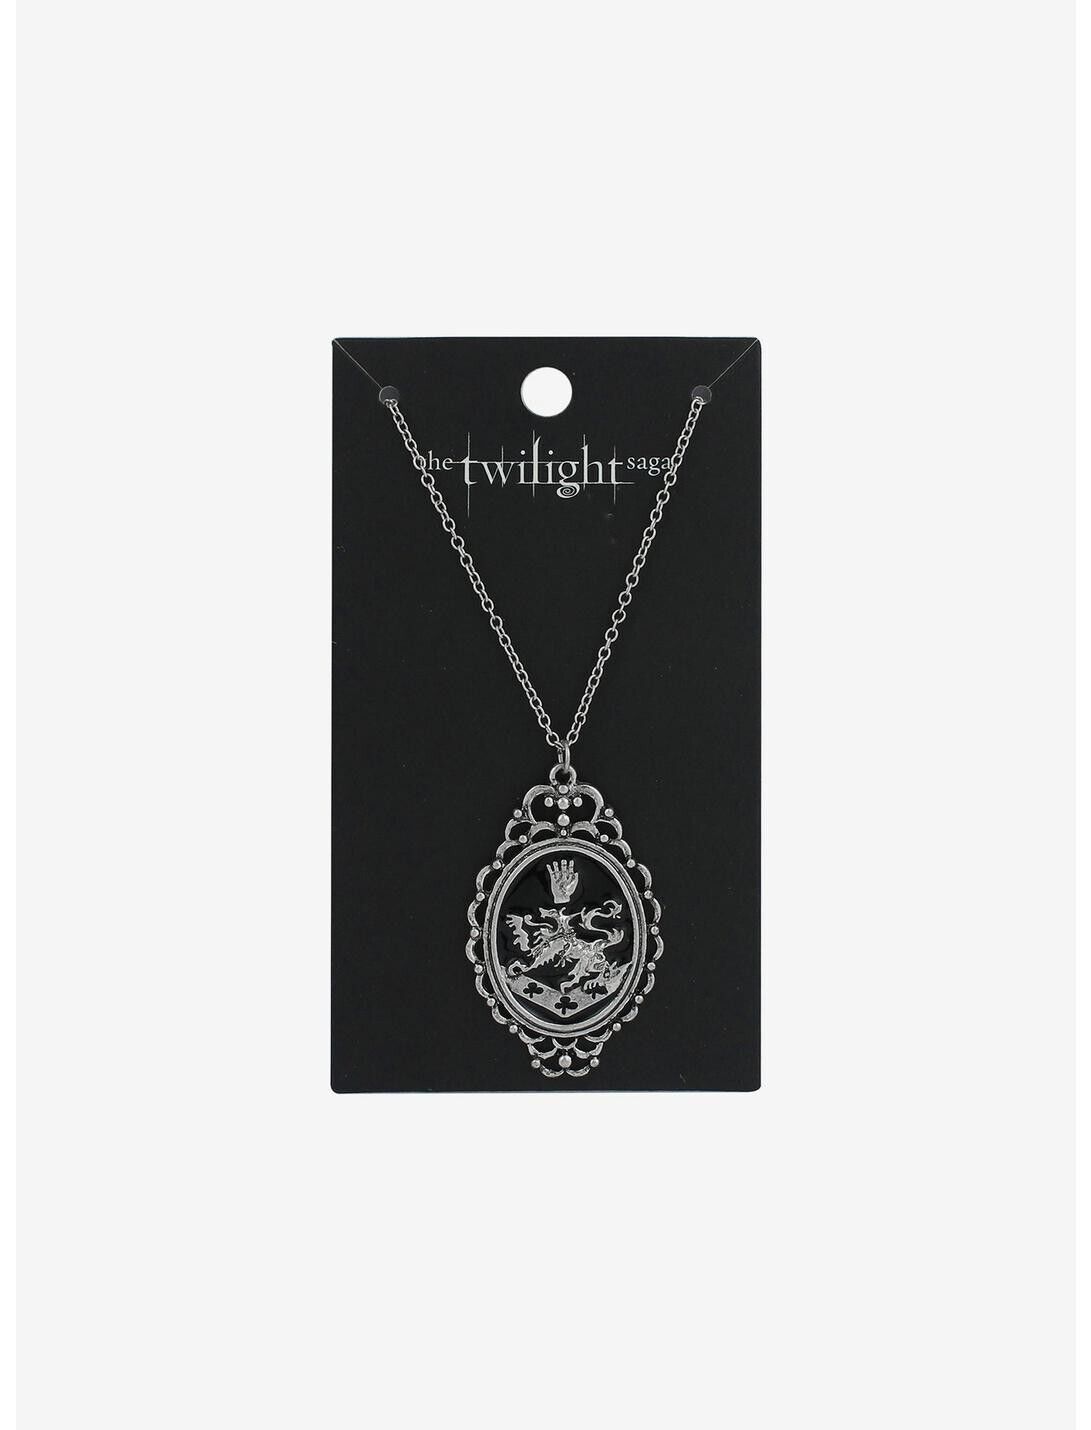 The Twilight Saga Cullen Crest Pendant Chain Ornate frame Necklace New SEALED